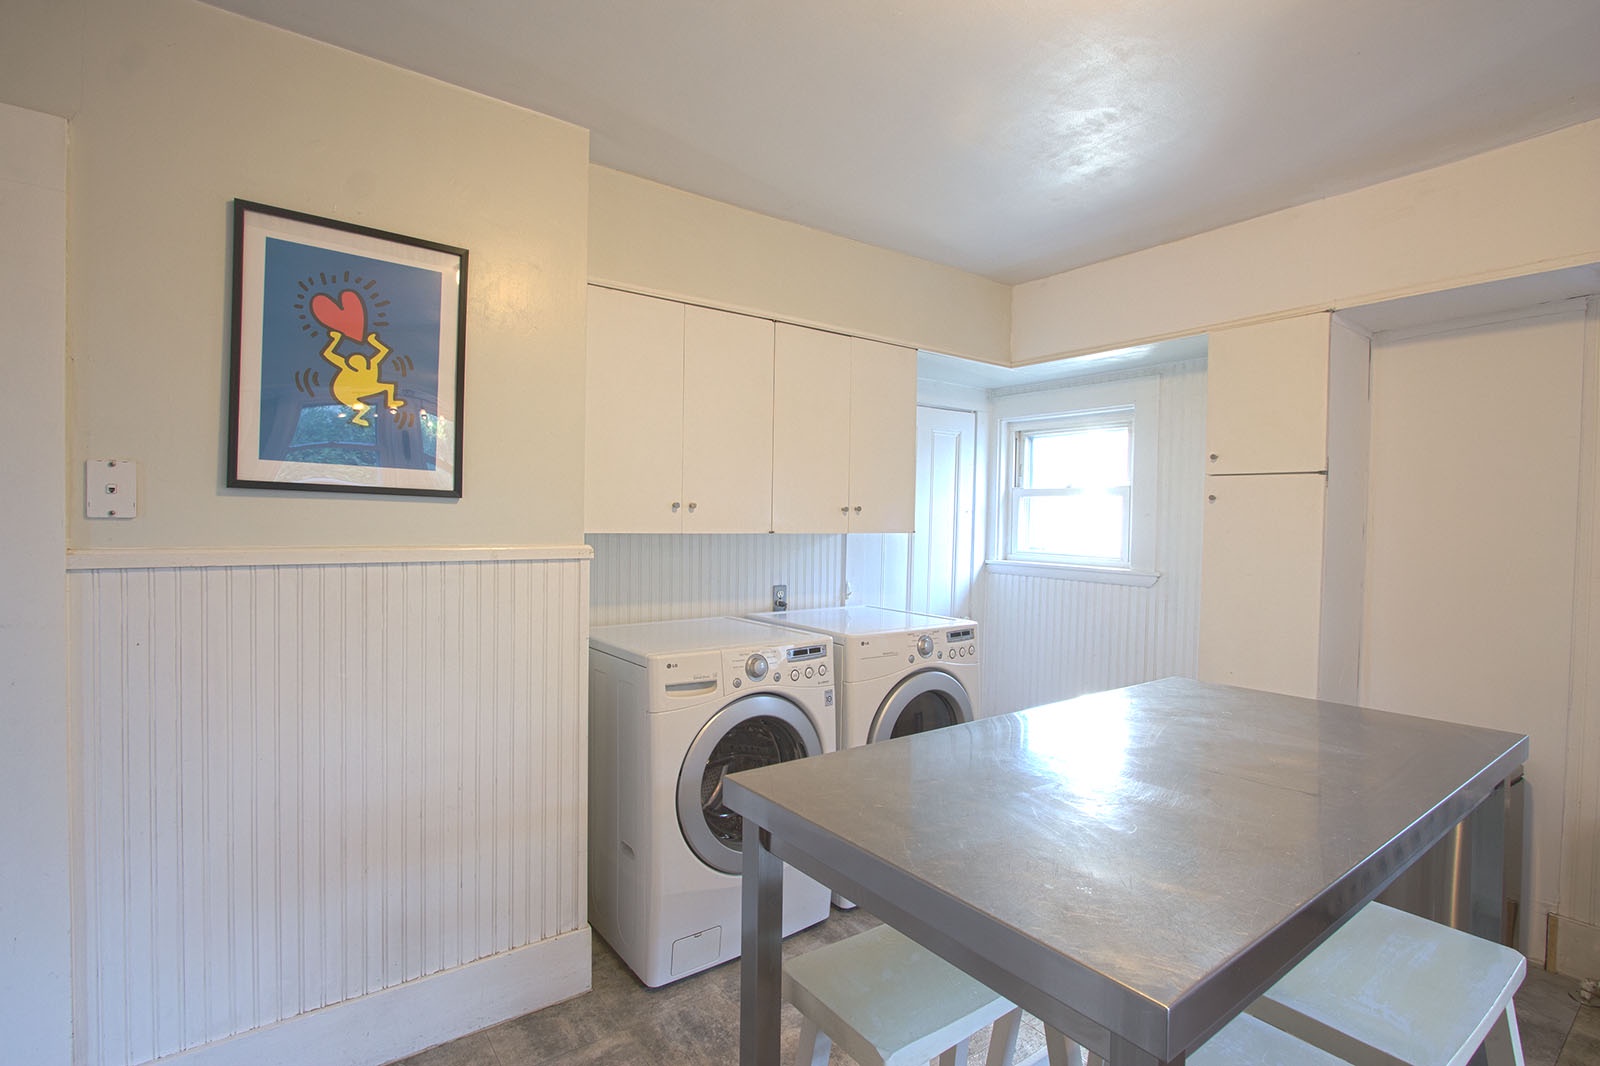 The washer and dryer are conveniently located in the kitchen.